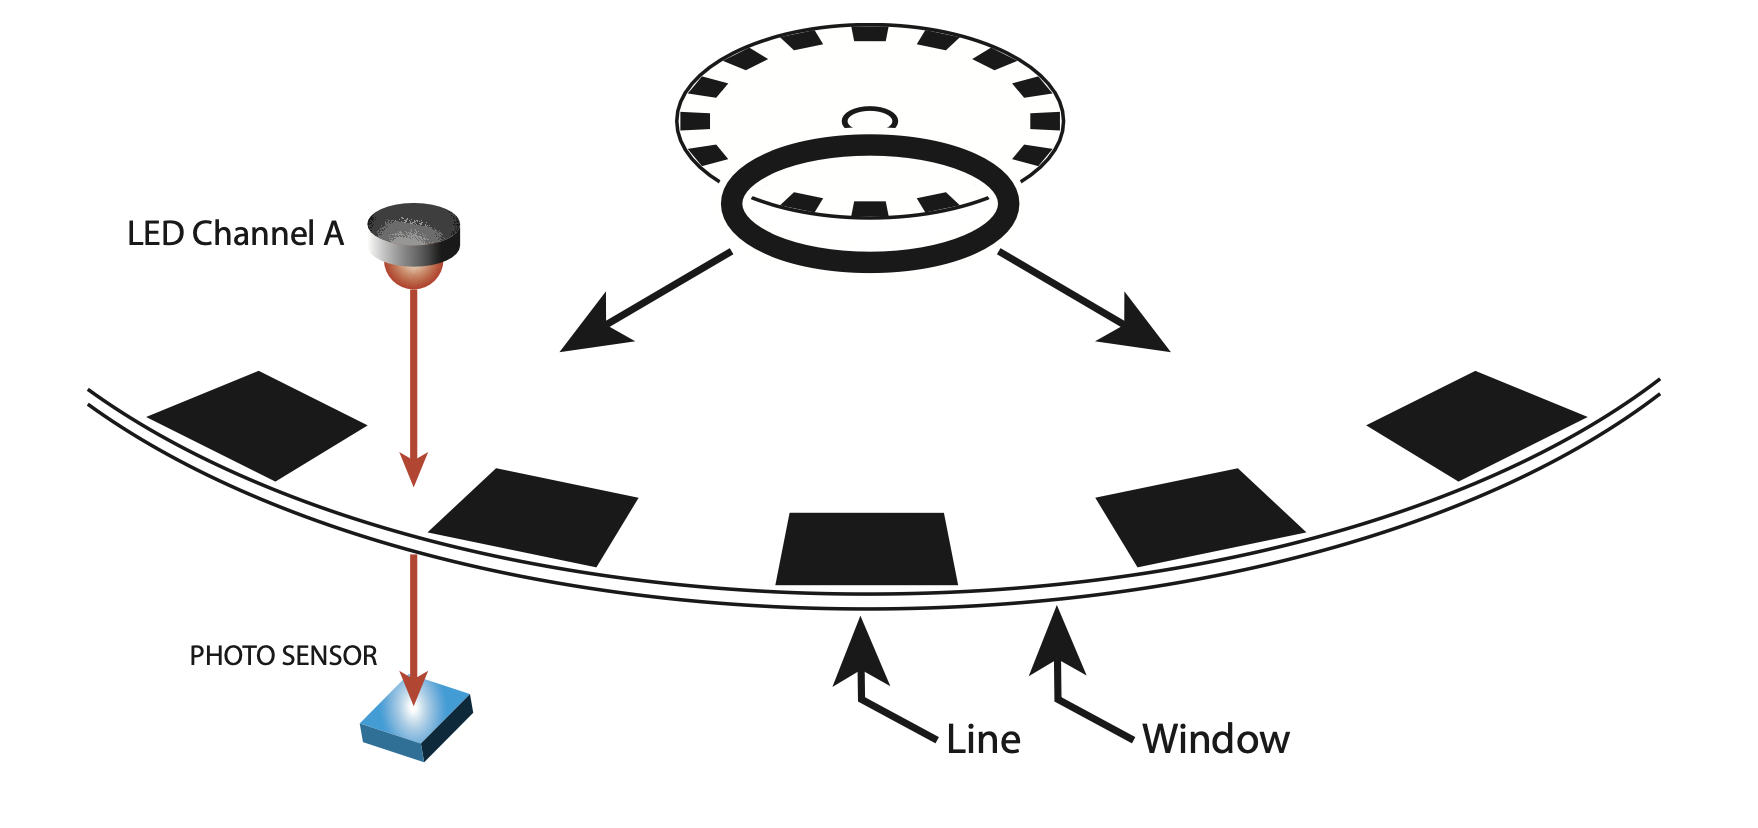 An illustration of how a basic encoder disk works using a photo sensor and led